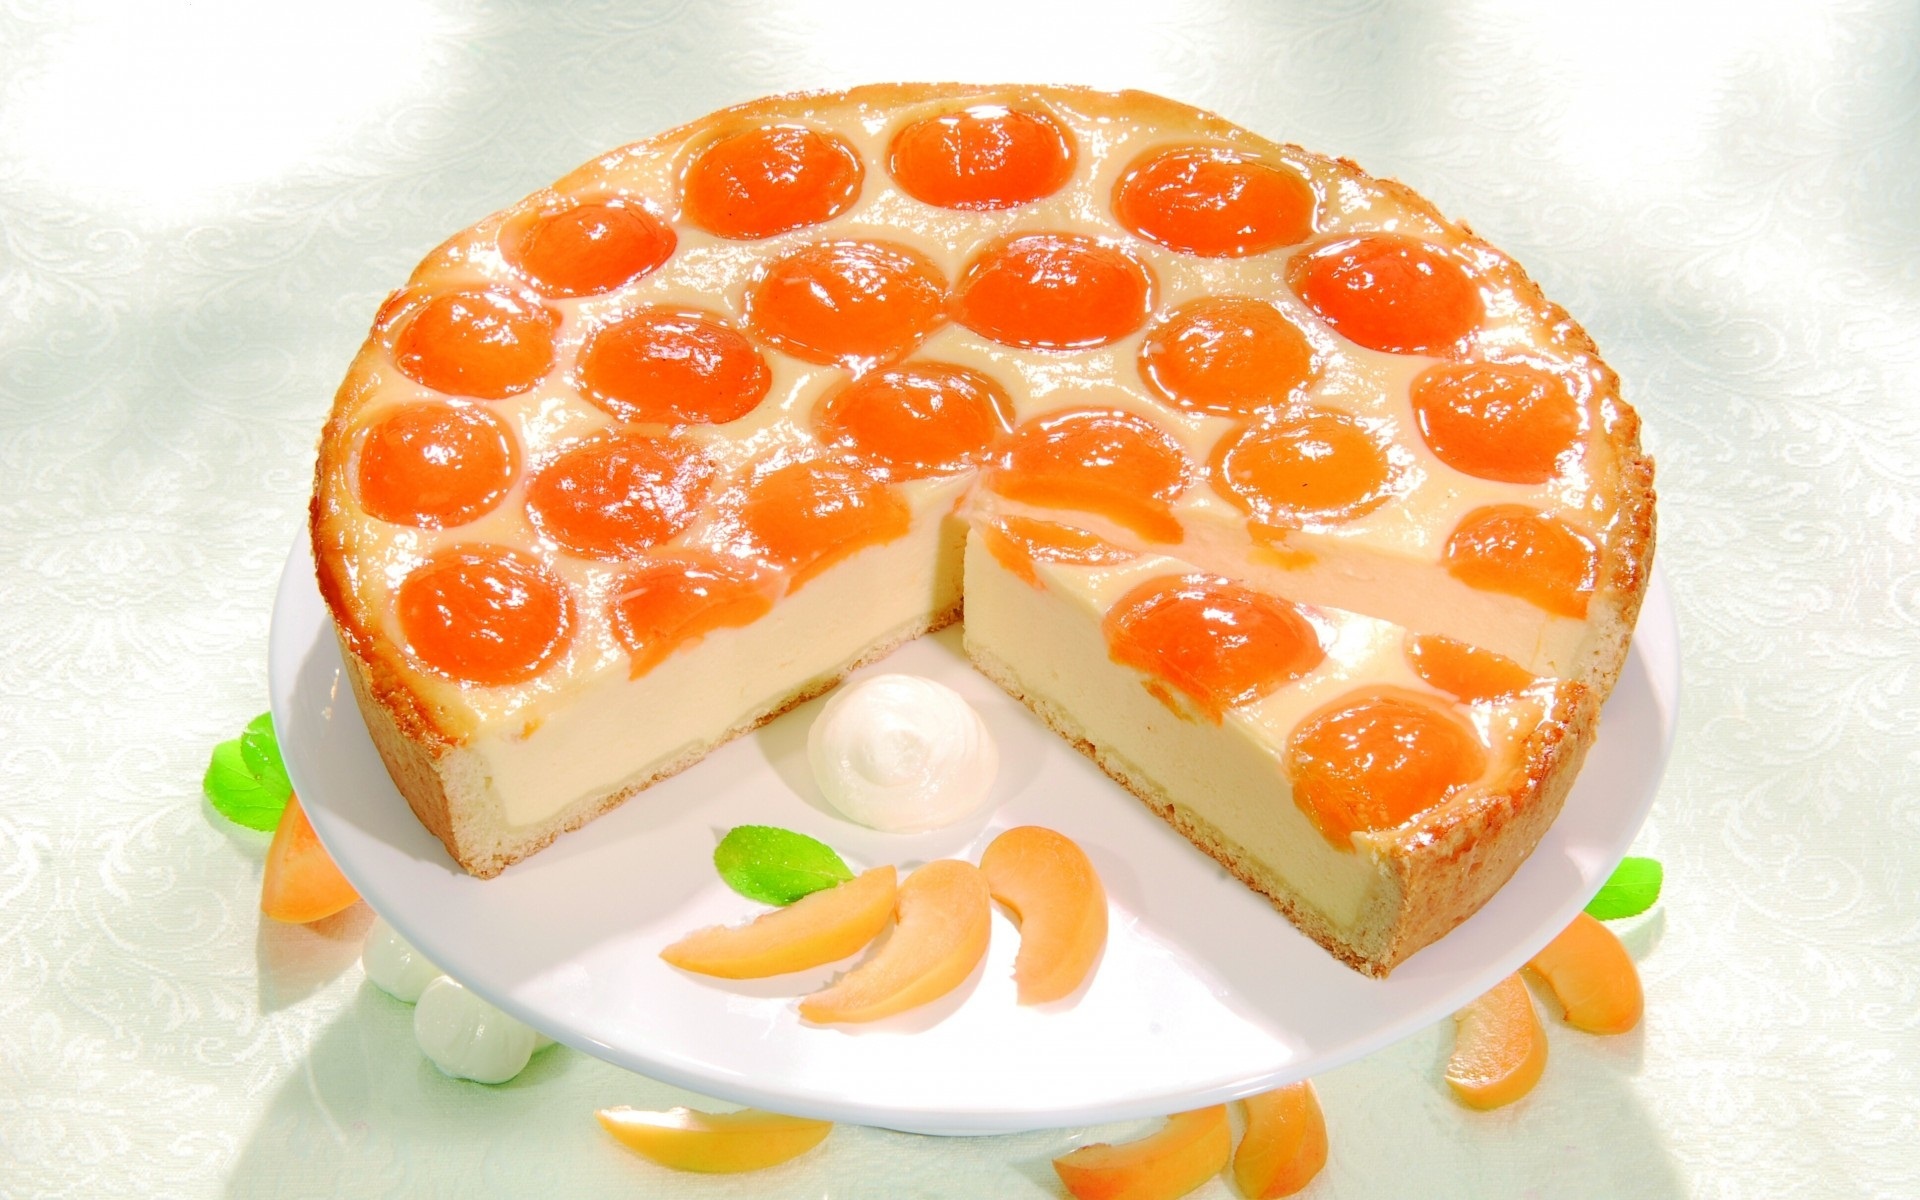 Cheesecake: Tastes good with all kinds of toppings. 1920x1200 HD Background.